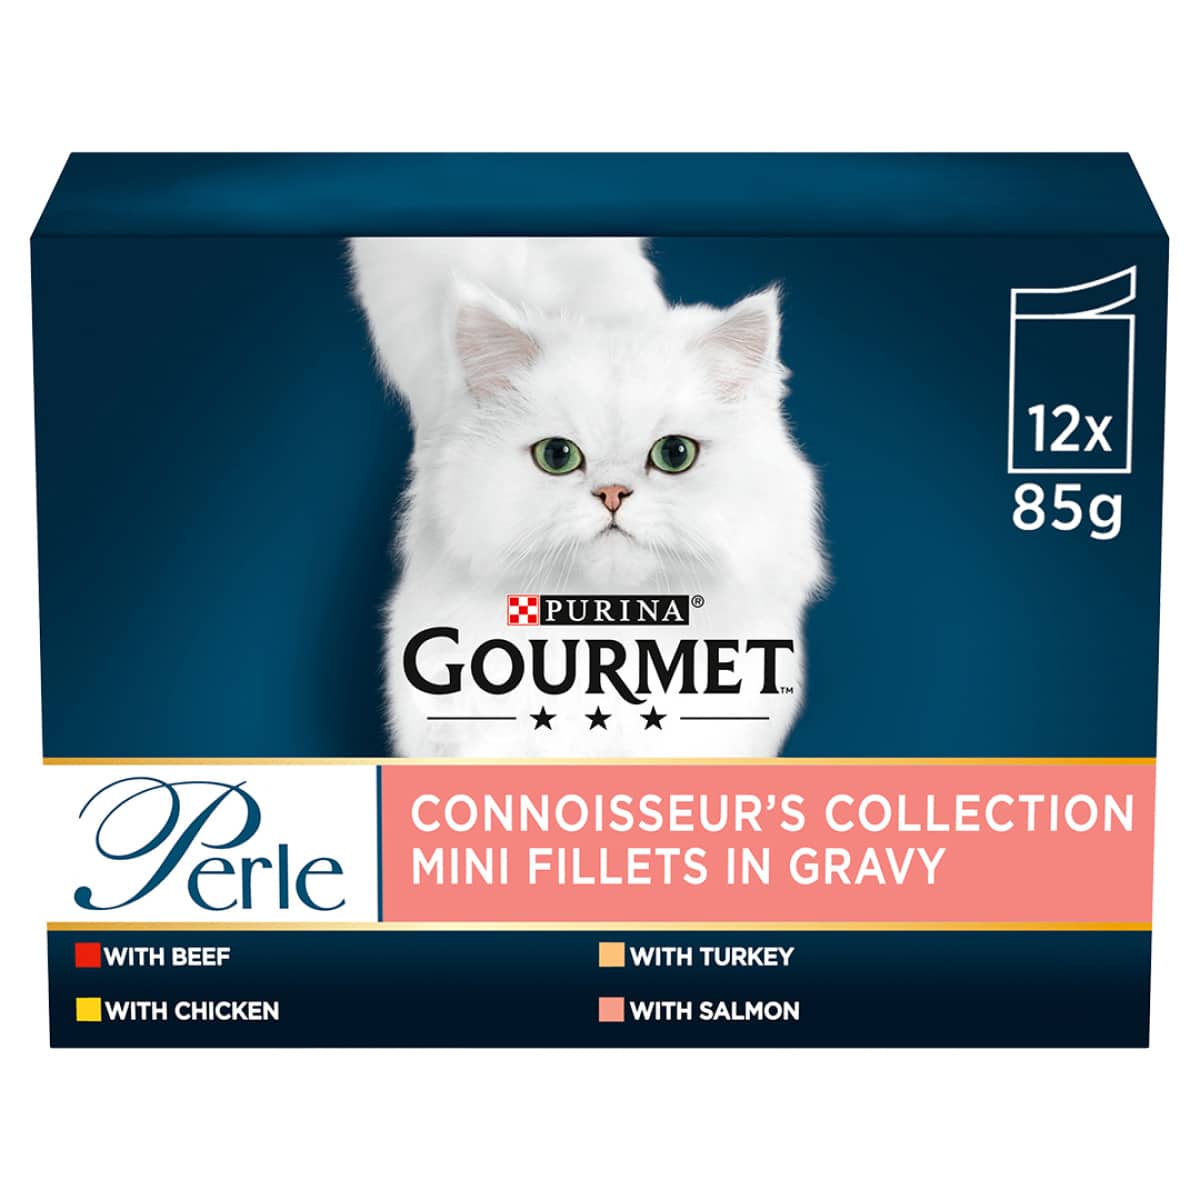 Gourmet Perle Connoisseurs Collection 12 x 85g Main Image